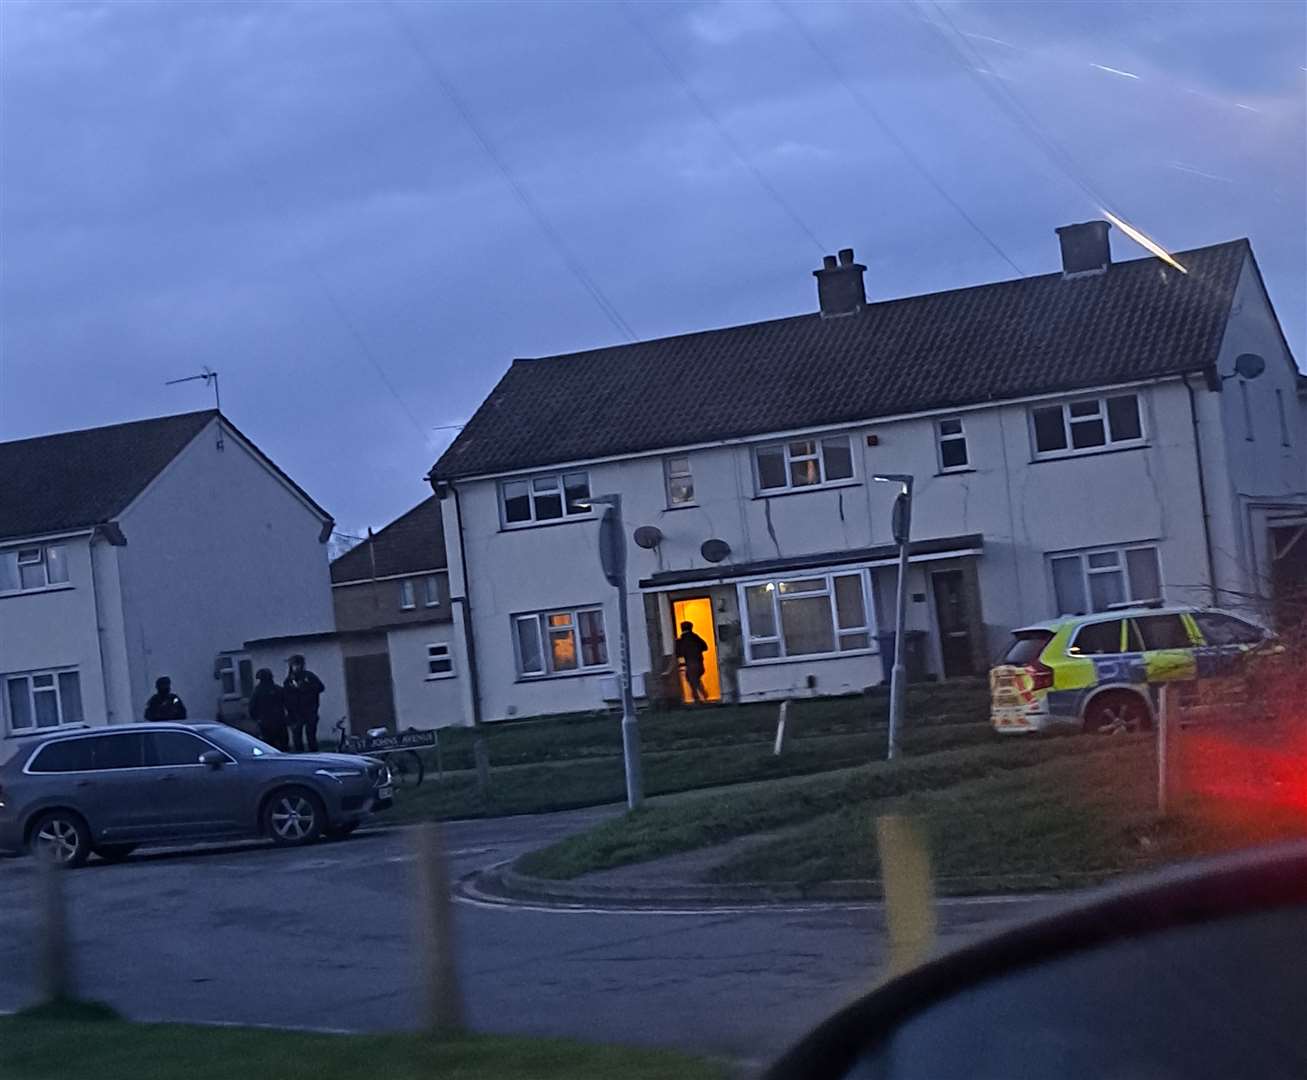 Armed officers entering a house on the residential street